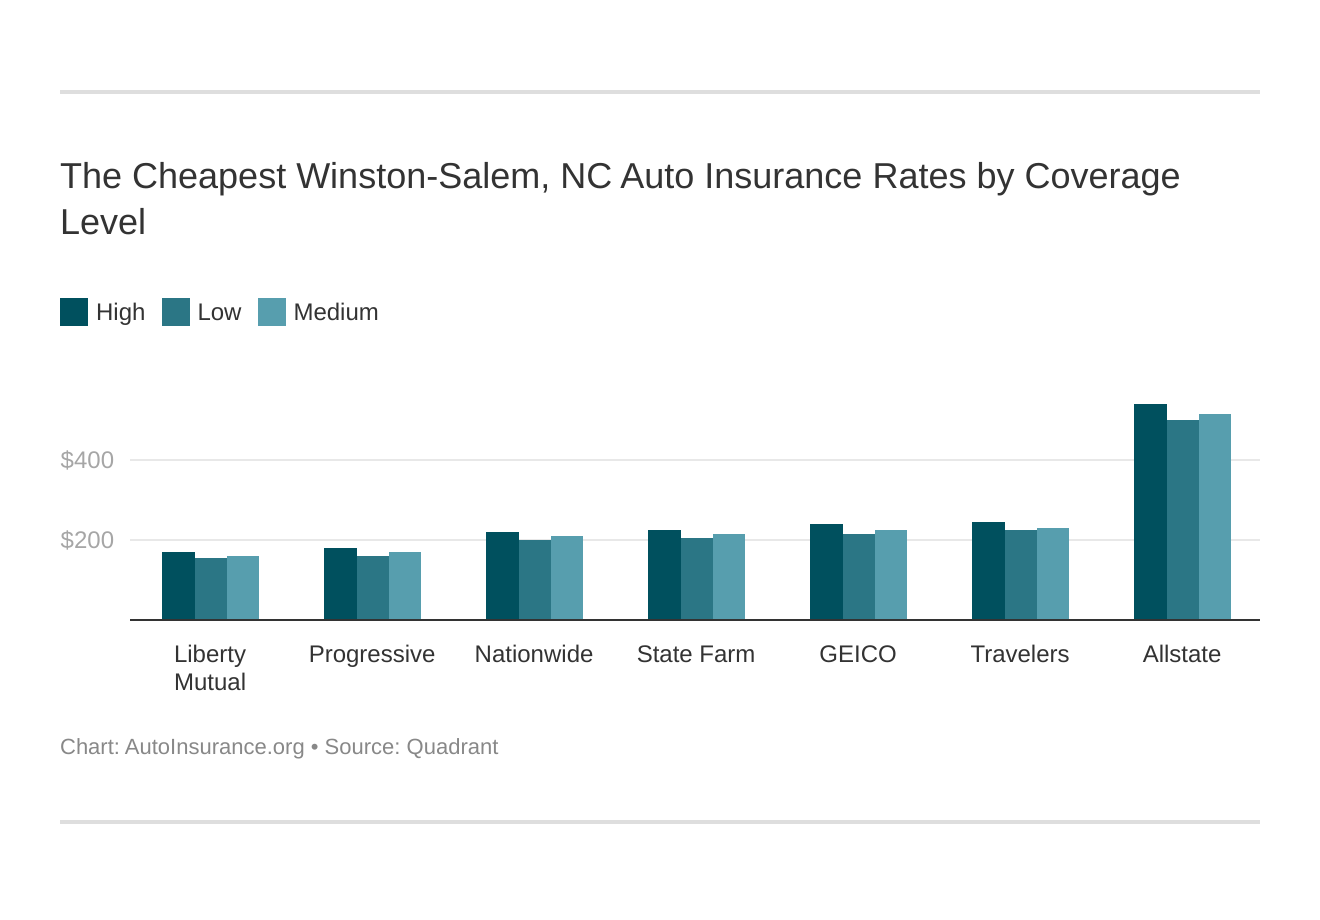 The Cheapest Winston-Salem, NC Auto Insurance Rates by Coverage Level